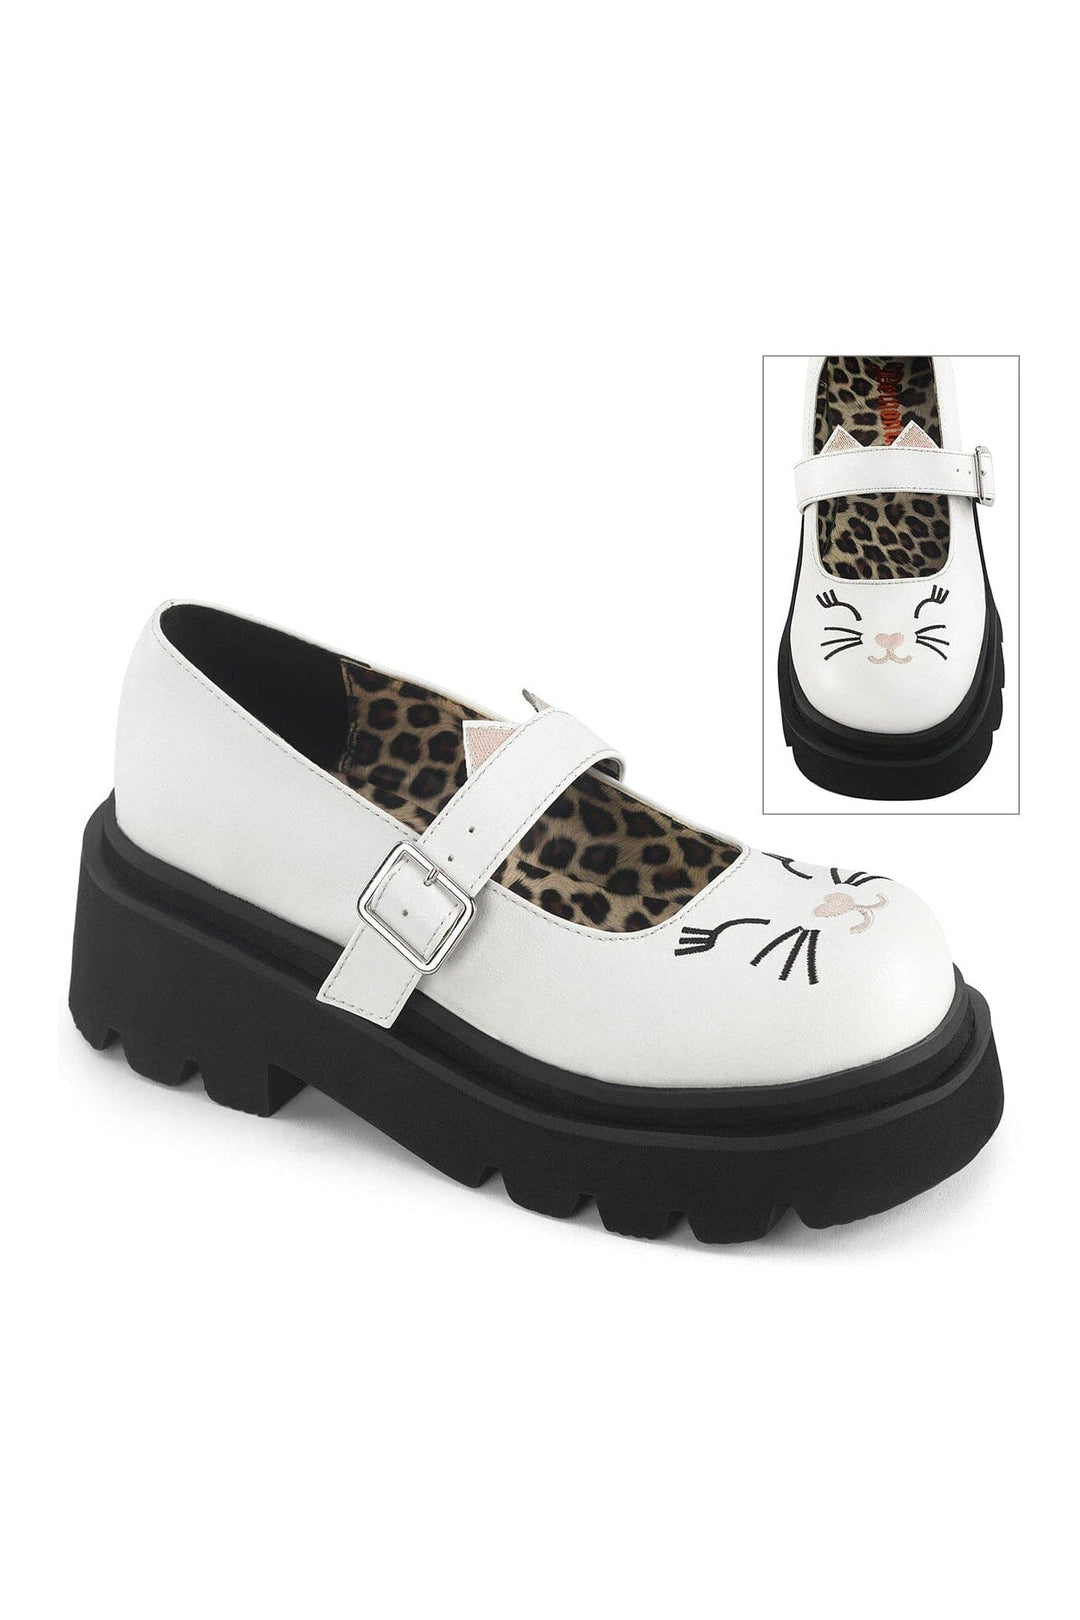 RENEGADE-56 White Vegan Leather Mary Janes-Mary Janes-Demonia-White-10-Vegan Leather-SEXYSHOES.COM